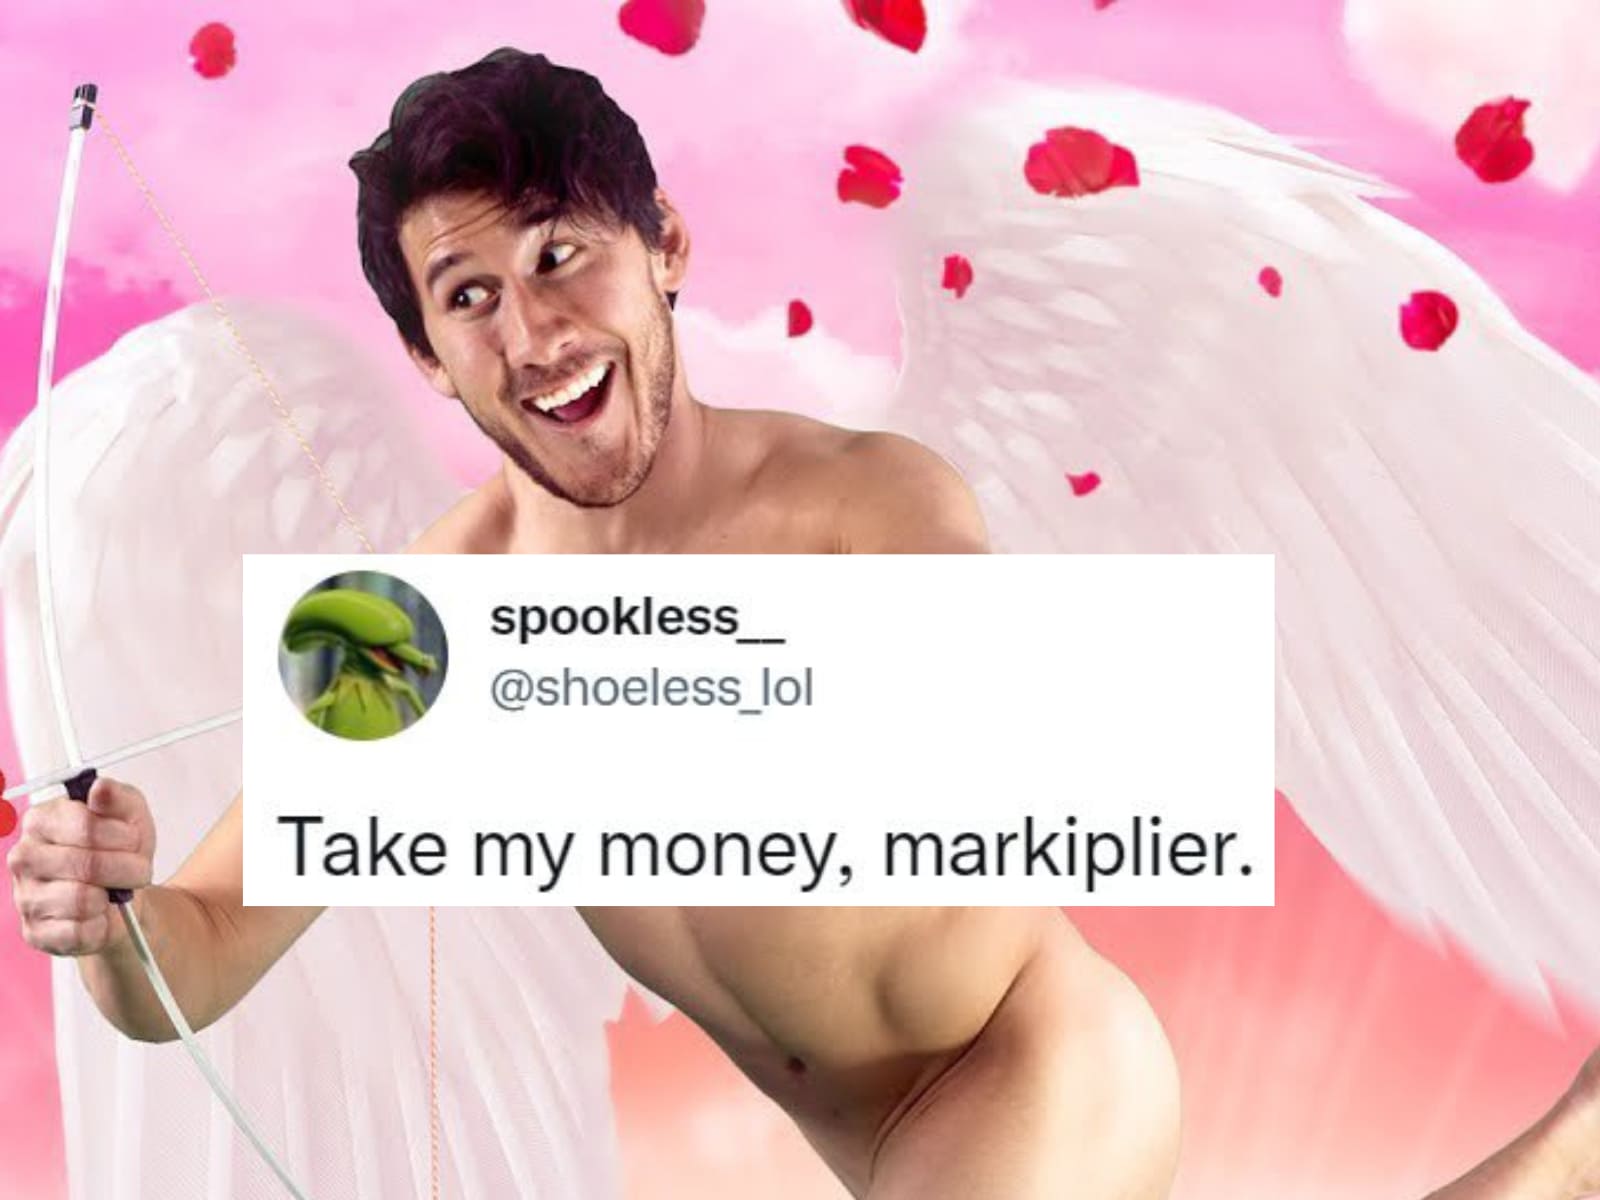 How Many Onlyfans Subscribers Does Markiplier Have